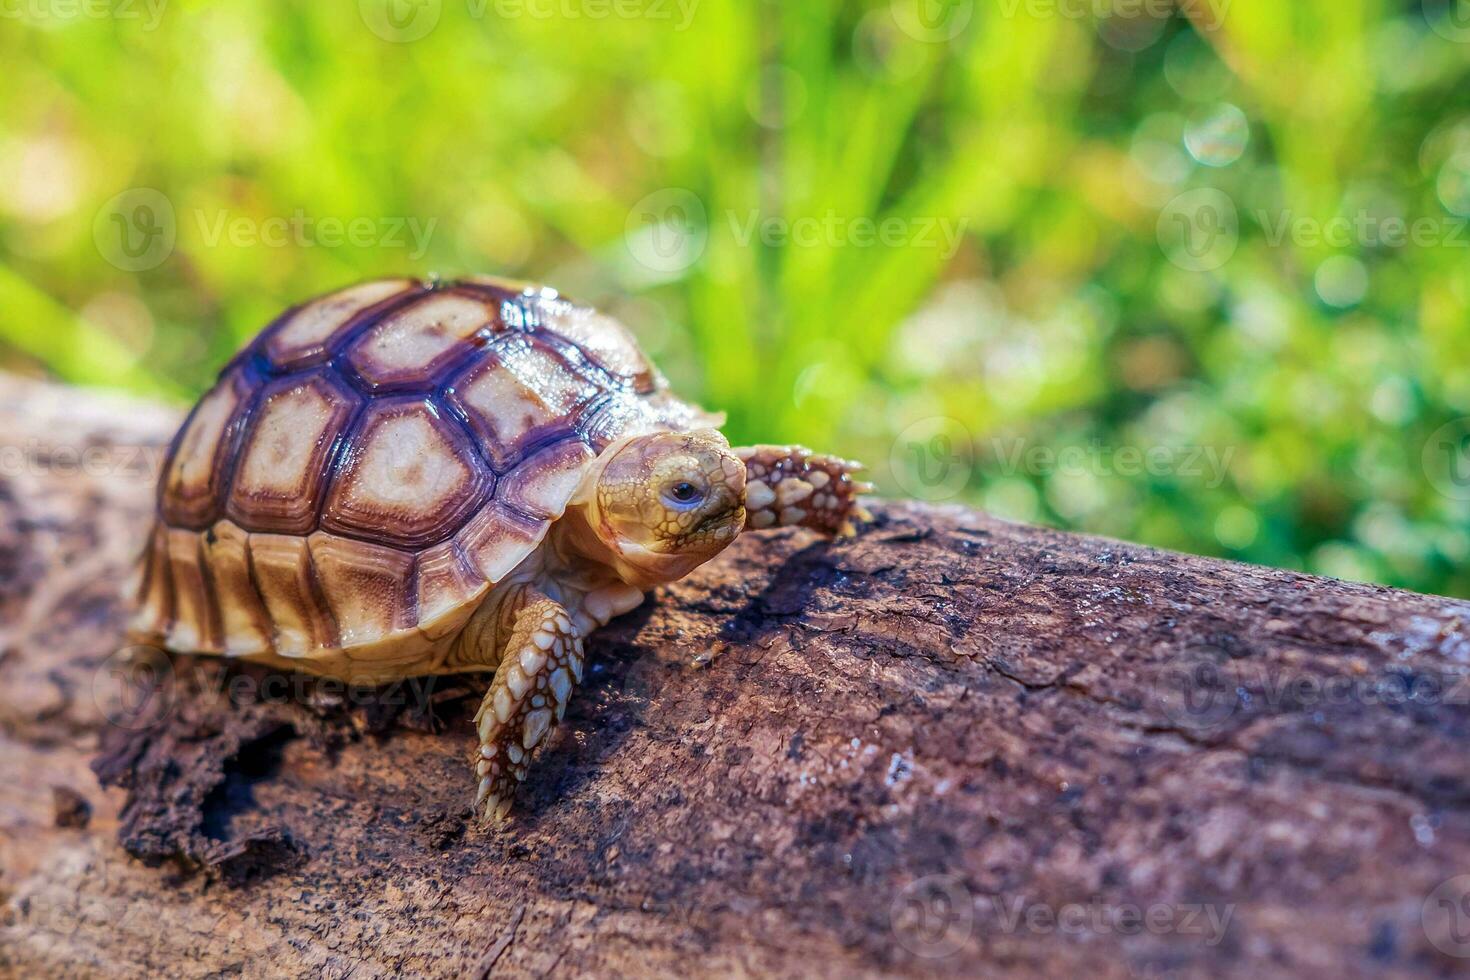 Close up of Sulcata tortoise or African spurred tortoise classified as a large tortoise in nature, Beautiful baby African spur tortoises on large log photo